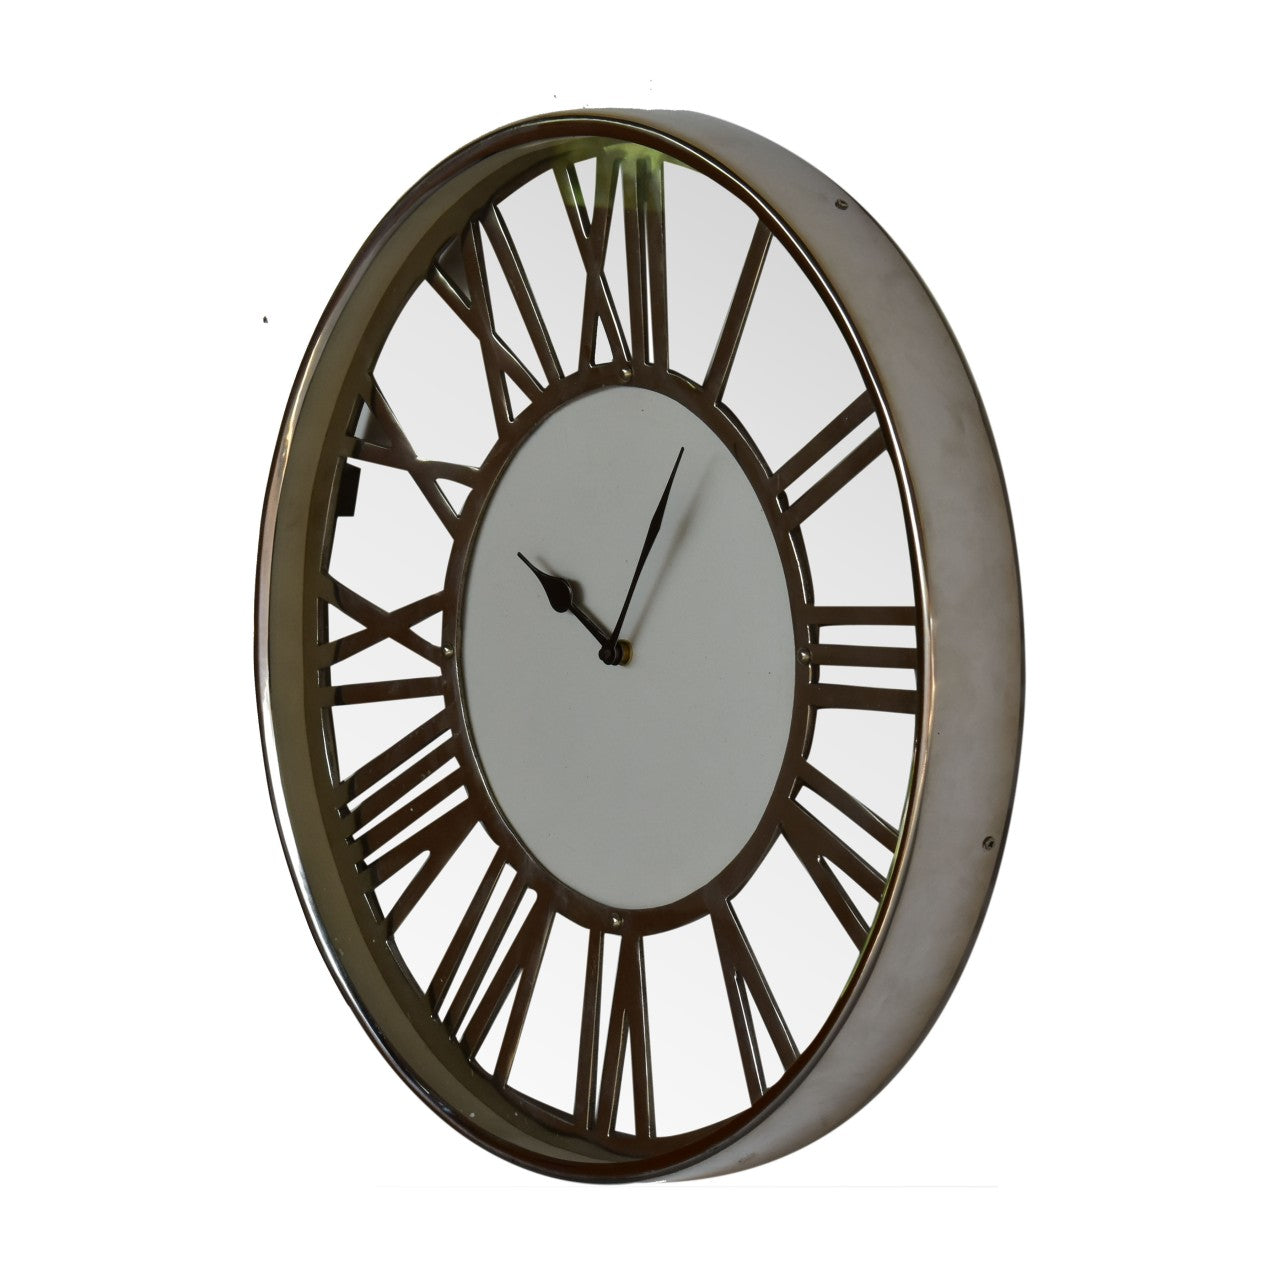 White and Chrome Wall Clock - CasaFenix